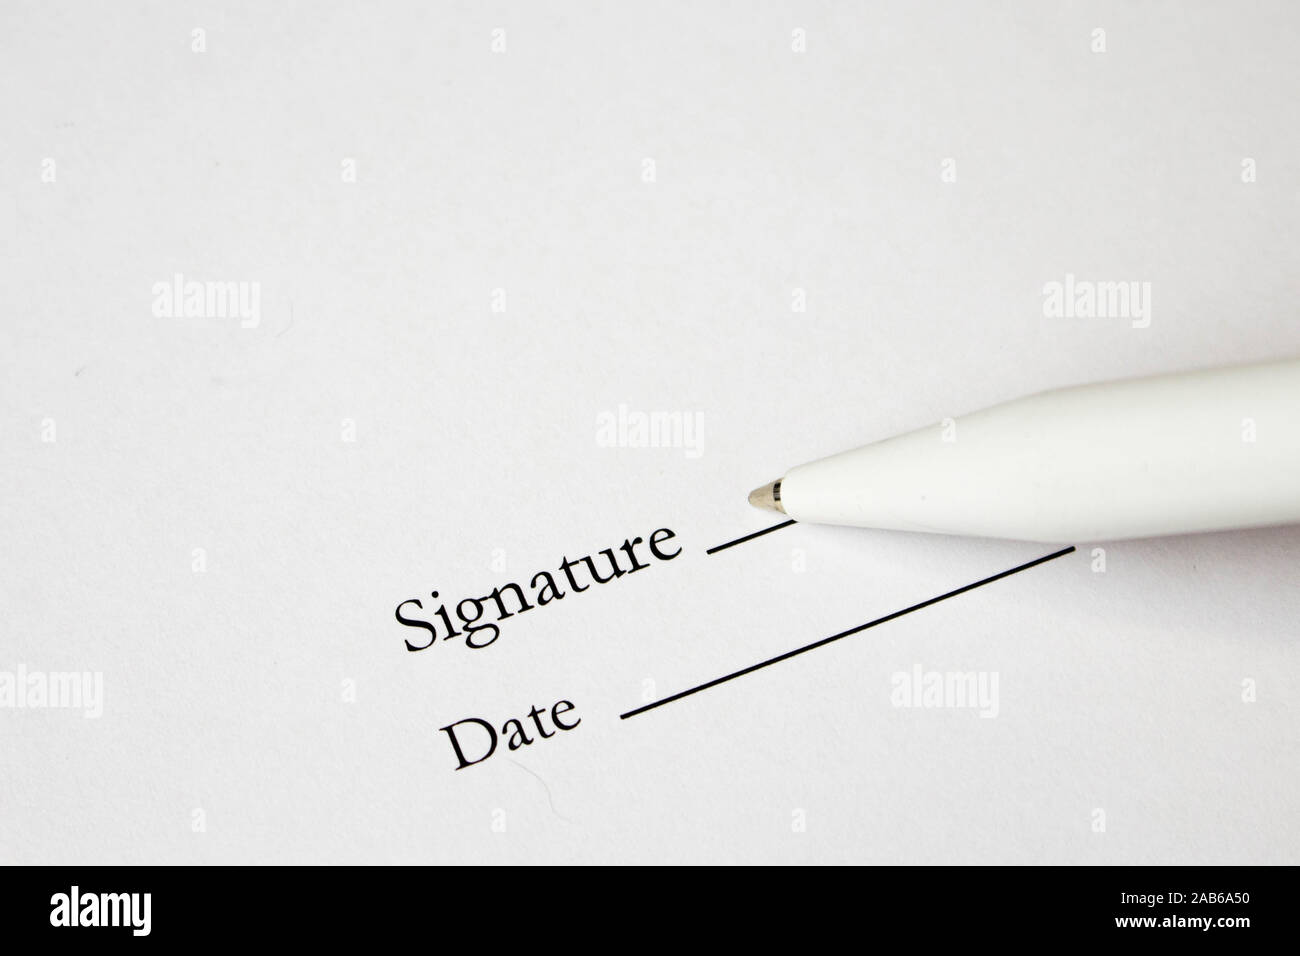 pen with signature and document in background. Focus on tip of fountain pen nib. Stock Photo